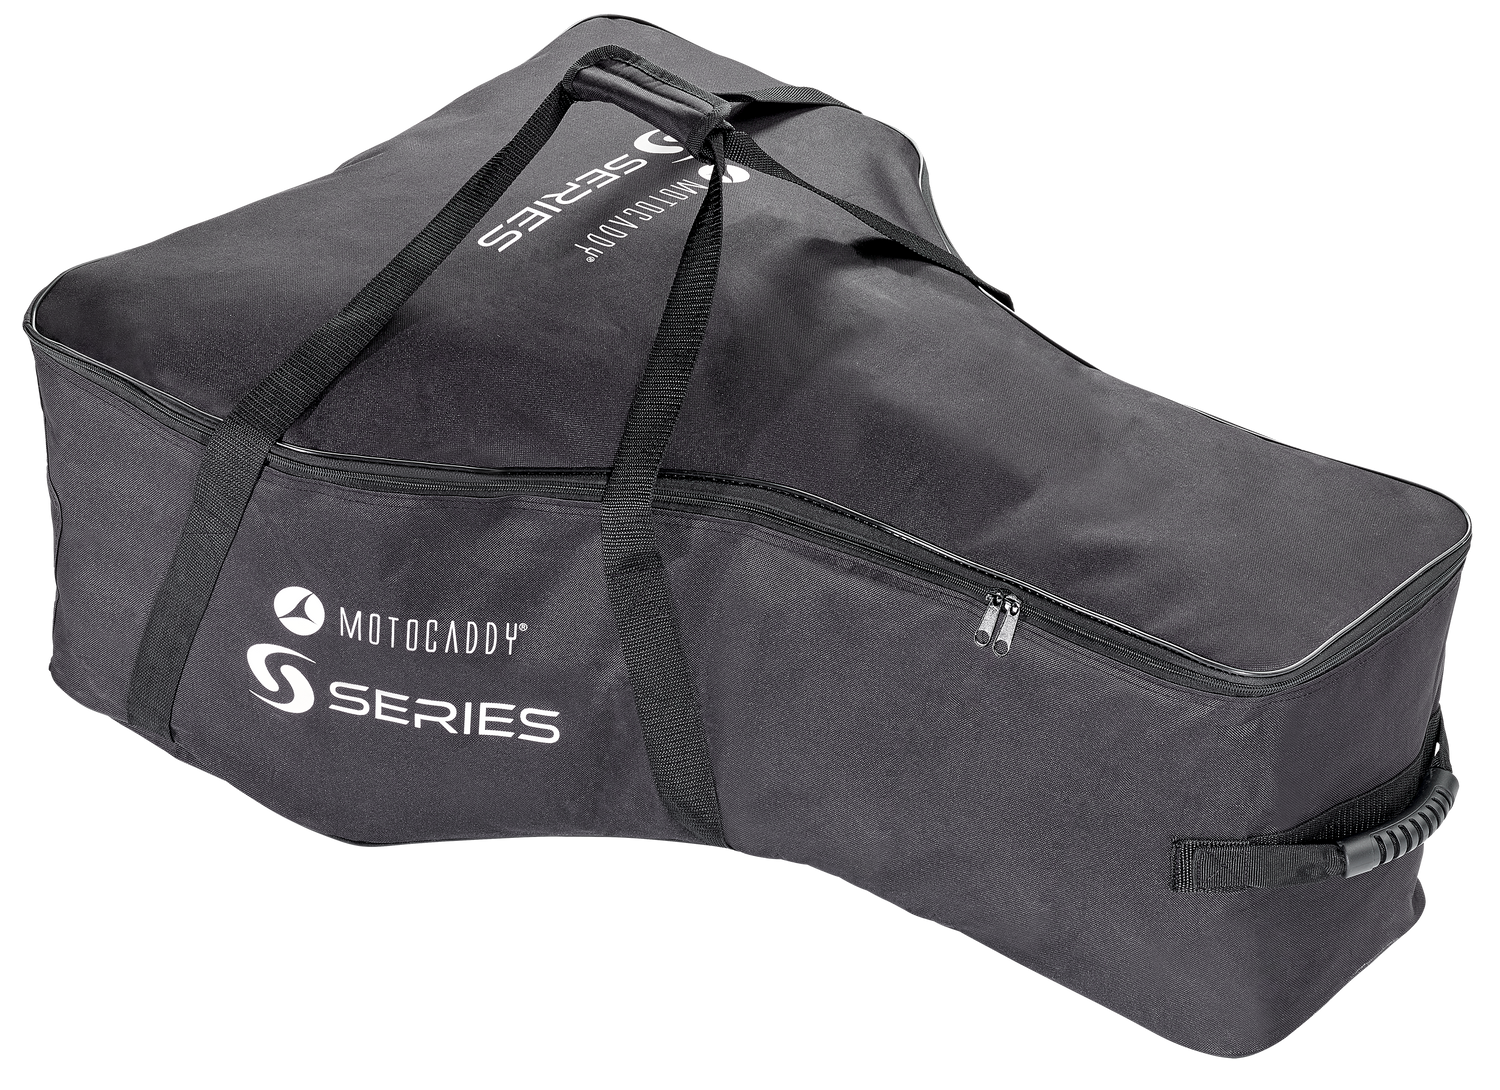 Motocaddy S Series Golf Trolley Travel Cover Bag   